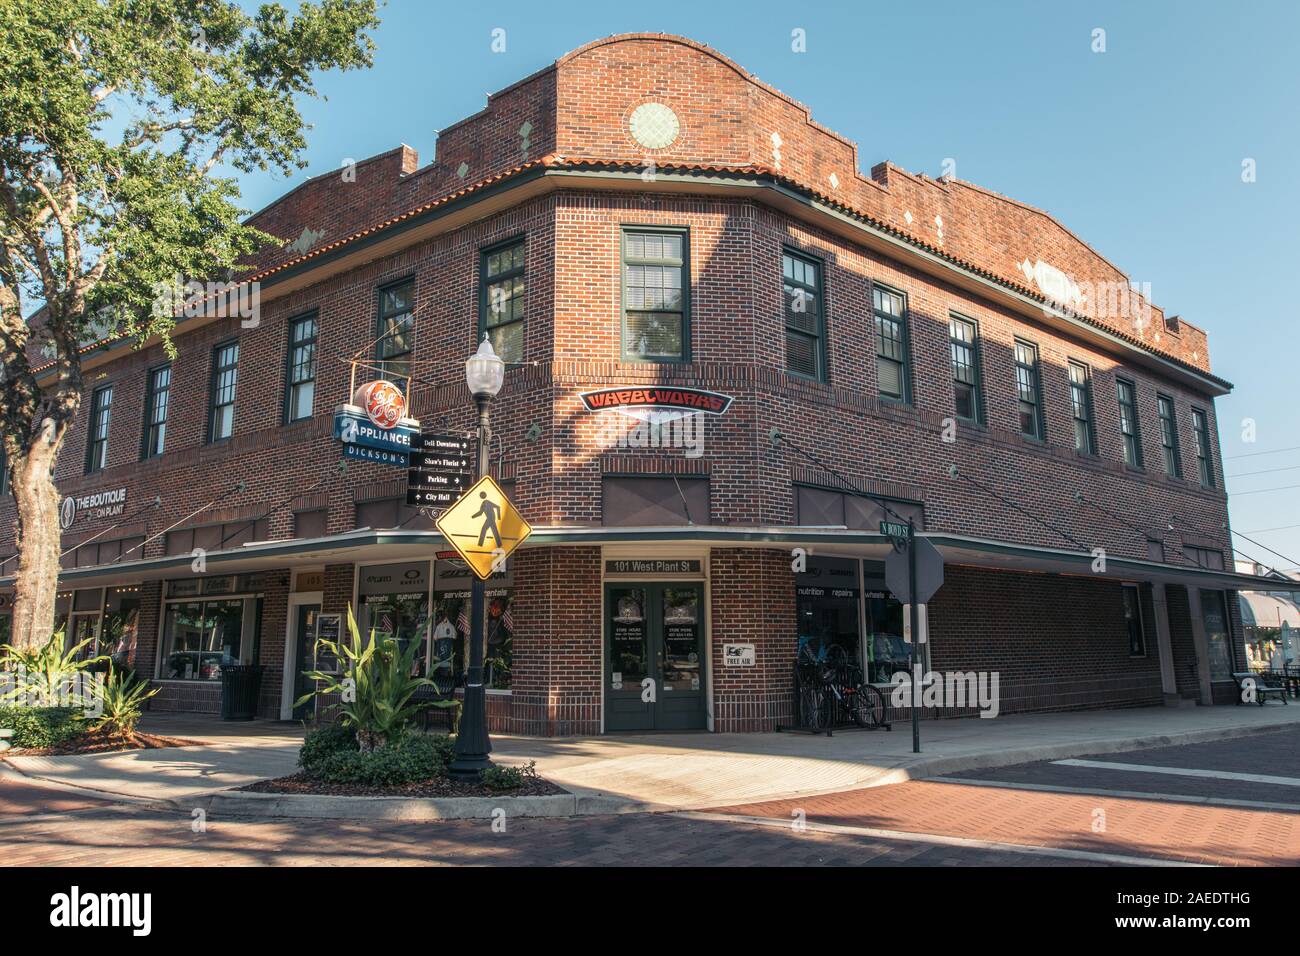 WINTER GARDEN, FLORIDA: MAY 29, 2019 - Wheel Works, a downtown bicycle service and repair shop off the West Orange bike trail in a vintage brick build Stock Photo